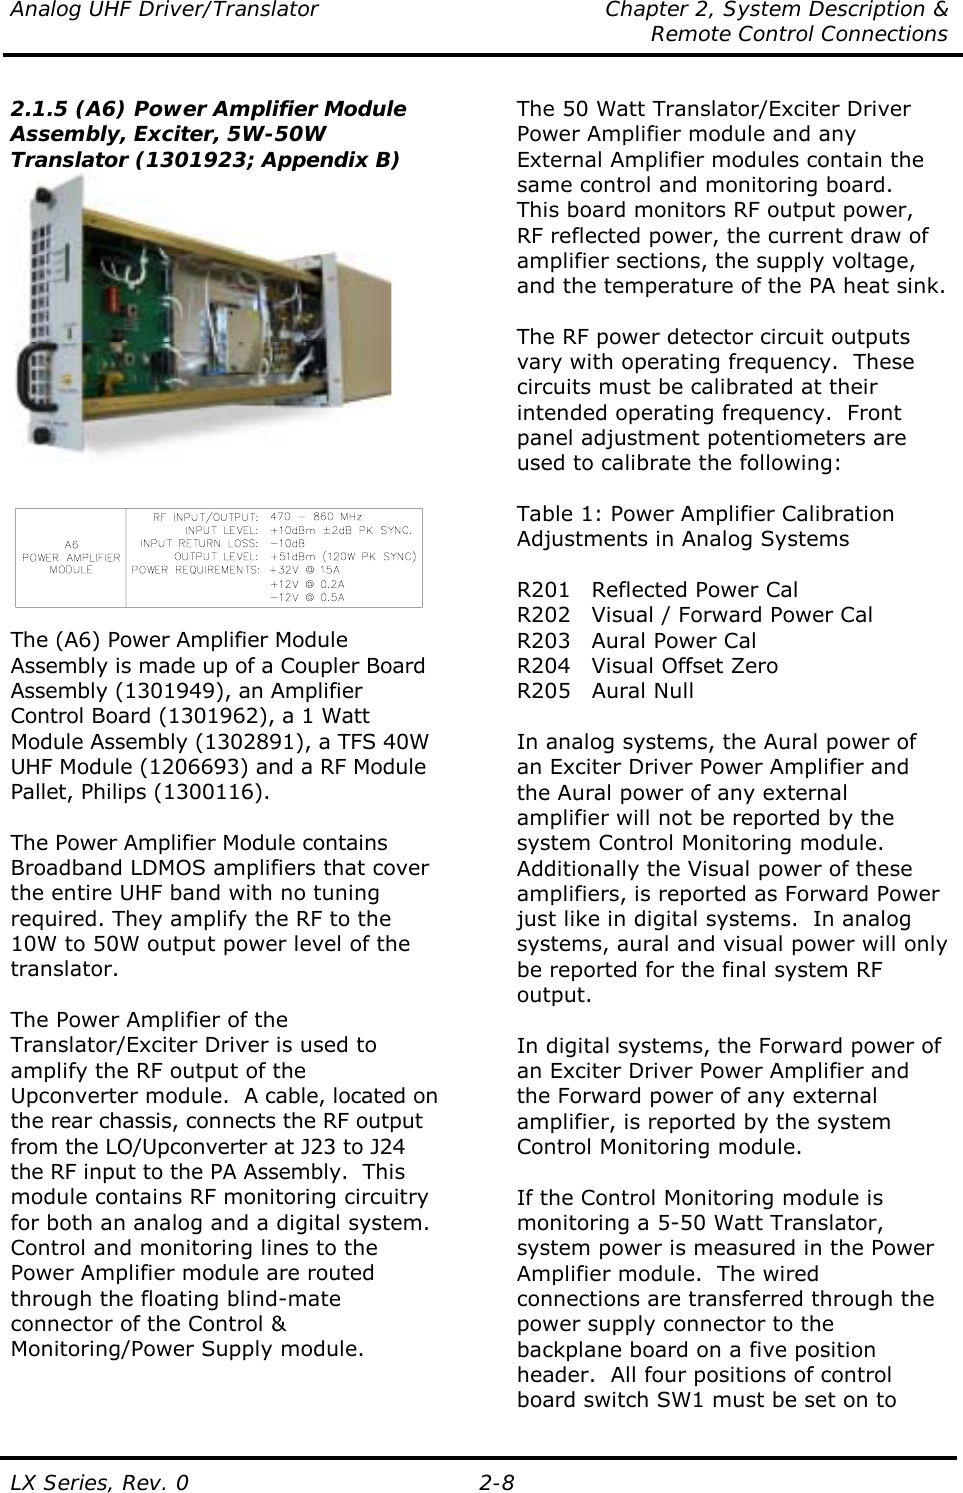 Analog UHF Driver/Translator  Chapter 2, System Description &amp;   Remote Control Connections LX Series, Rev. 0  2-8 2.1.5 (A6) Power Amplifier Module Assembly, Exciter, 5W-50W Translator (1301923; Appendix B)    The (A6) Power Amplifier Module Assembly is made up of a Coupler Board Assembly (1301949), an Amplifier Control Board (1301962), a 1 Watt Module Assembly (1302891), a TFS 40W UHF Module (1206693) and a RF Module Pallet, Philips (1300116).  The Power Amplifier Module contains Broadband LDMOS amplifiers that cover the entire UHF band with no tuning required. They amplify the RF to the 10W to 50W output power level of the translator.  The Power Amplifier of the Translator/Exciter Driver is used to amplify the RF output of the Upconverter module.  A cable, located on the rear chassis, connects the RF output from the LO/Upconverter at J23 to J24 the RF input to the PA Assembly.  This module contains RF monitoring circuitry for both an analog and a digital system.  Control and monitoring lines to the Power Amplifier module are routed through the floating blind-mate connector of the Control &amp; Monitoring/Power Supply module.  The 50 Watt Translator/Exciter Driver Power Amplifier module and any External Amplifier modules contain the same control and monitoring board.  This board monitors RF output power, RF reflected power, the current draw of amplifier sections, the supply voltage, and the temperature of the PA heat sink.  The RF power detector circuit outputs vary with operating frequency.  These circuits must be calibrated at their intended operating frequency.  Front panel adjustment potentiometers are used to calibrate the following:  Table 1: Power Amplifier Calibration Adjustments in Analog Systems  R201  Reflected Power Cal R202  Visual / Forward Power Cal R203  Aural Power Cal R204  Visual Offset Zero R205 Aural Null  In analog systems, the Aural power of an Exciter Driver Power Amplifier and the Aural power of any external amplifier will not be reported by the system Control Monitoring module.  Additionally the Visual power of these amplifiers, is reported as Forward Power just like in digital systems.  In analog systems, aural and visual power will only be reported for the final system RF output.    In digital systems, the Forward power of an Exciter Driver Power Amplifier and the Forward power of any external amplifier, is reported by the system Control Monitoring module.   If the Control Monitoring module is monitoring a 5-50 Watt Translator, system power is measured in the Power Amplifier module.  The wired connections are transferred through the power supply connector to the backplane board on a five position header.  All four positions of control board switch SW1 must be set on to 